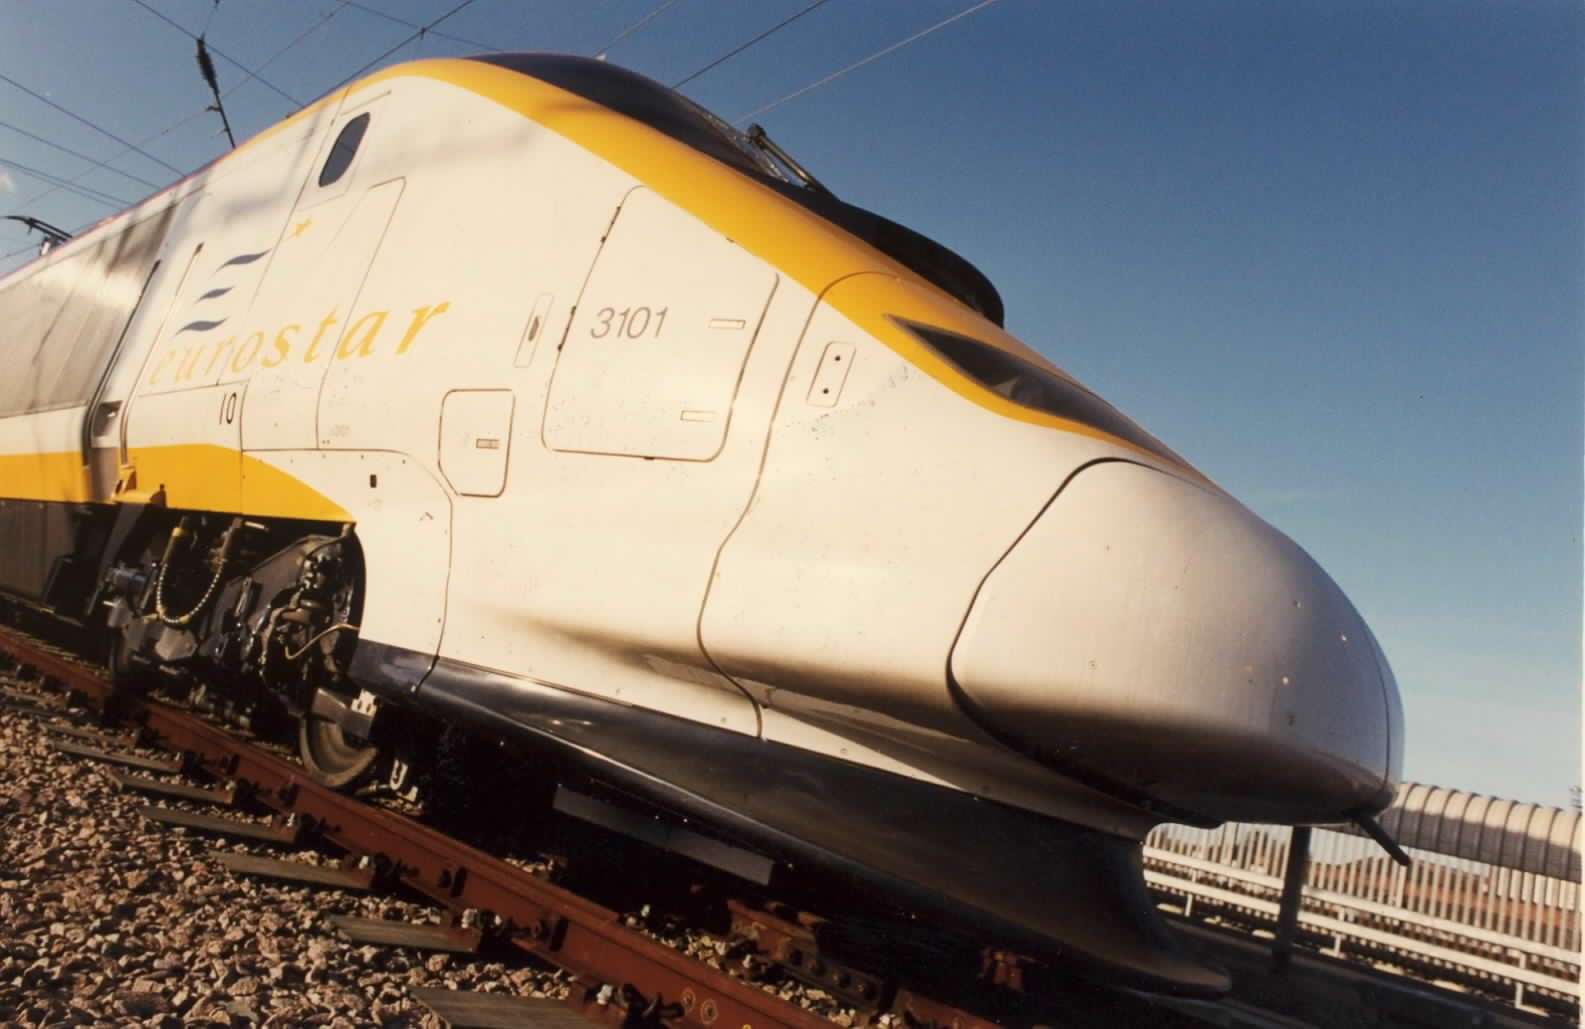 Eurostar is celebrating its 25th year coming to Kent